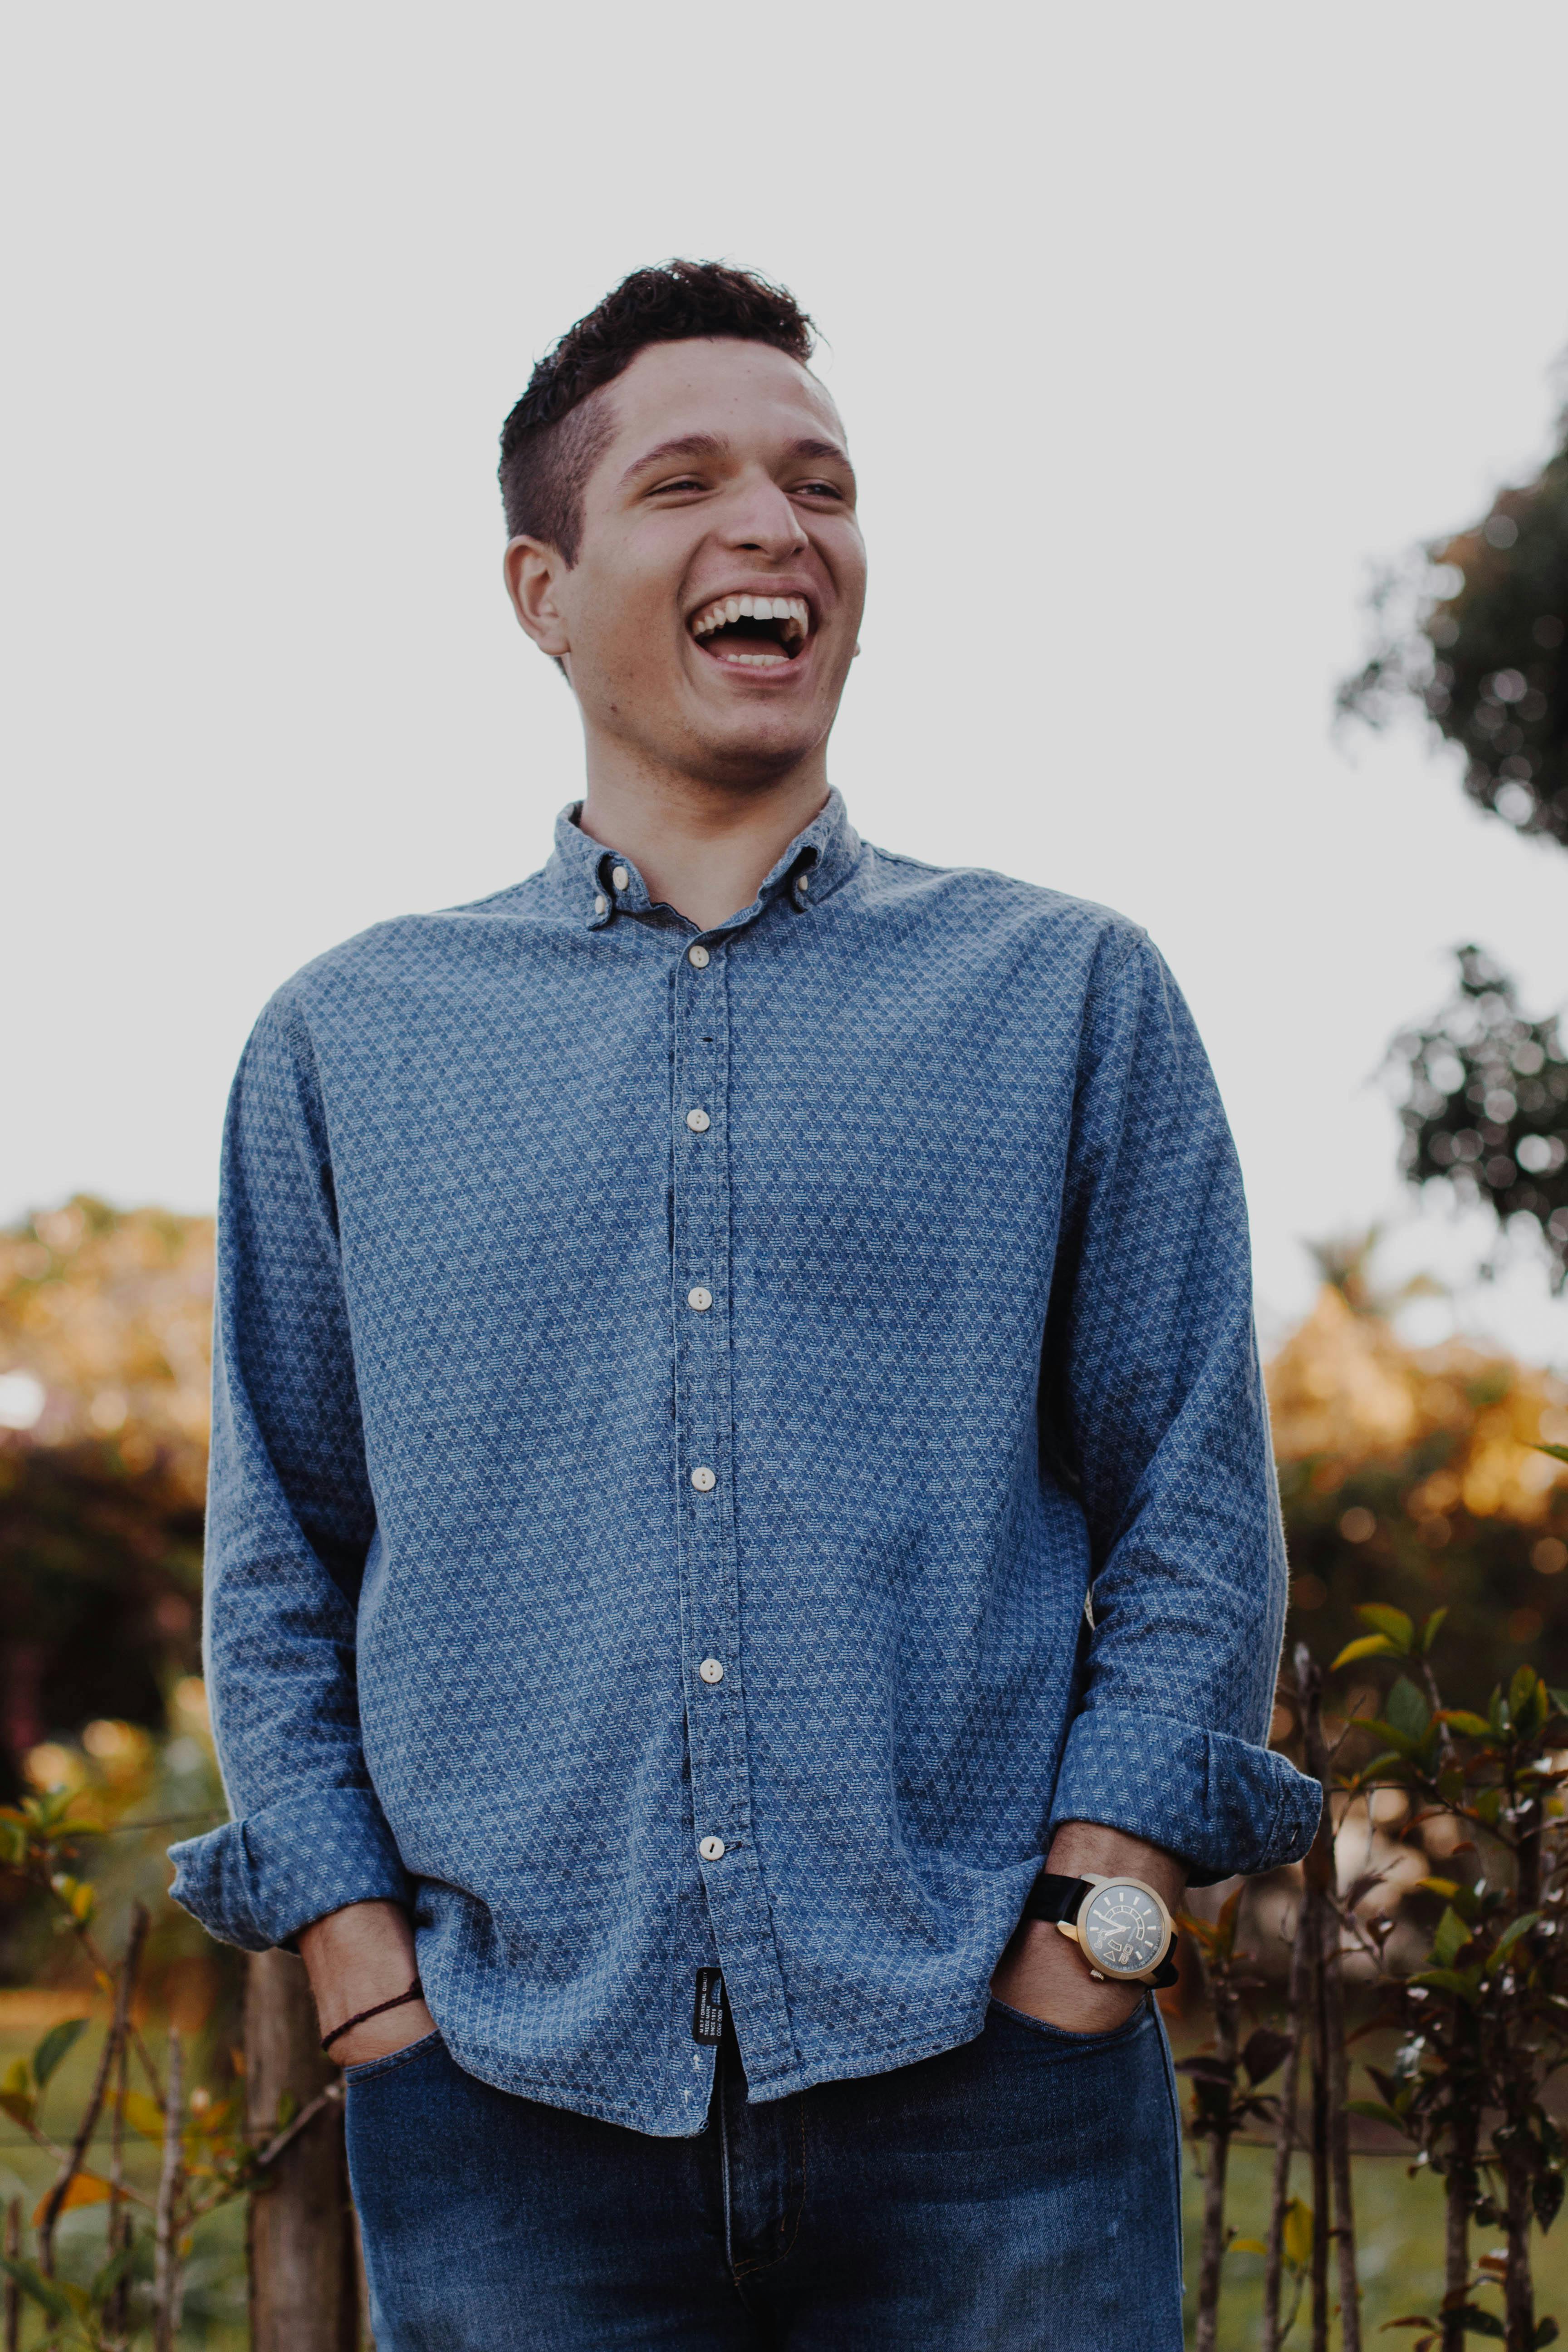 Young man laughing. | Photo: Pexels